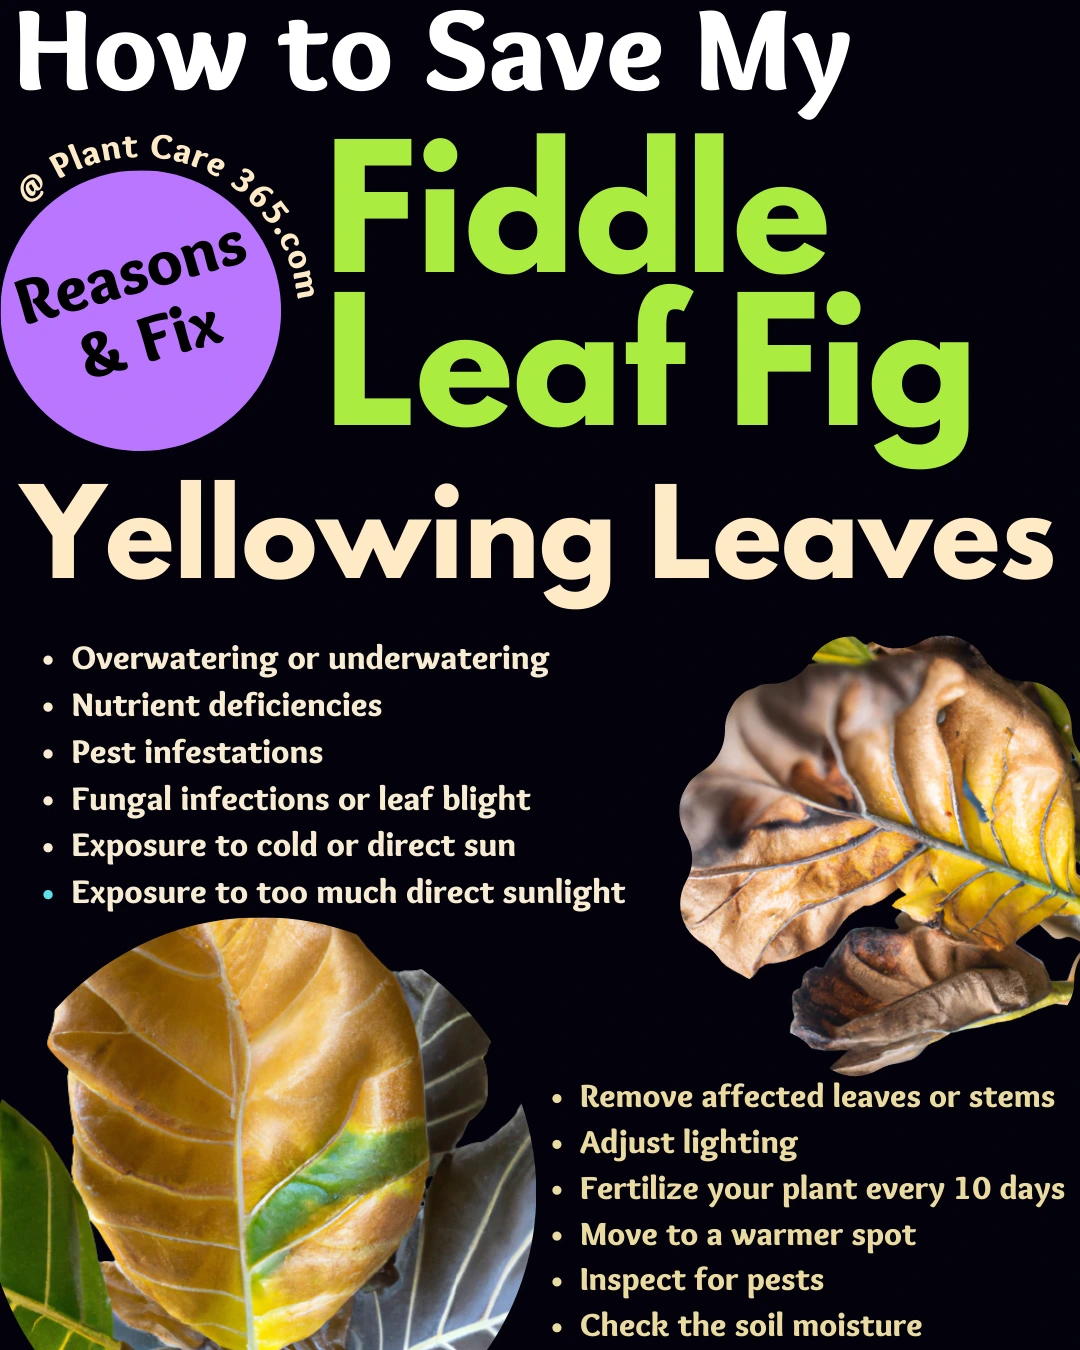 Reasons and Fix for Dying Fiddle Leaf Fig Yellowing Leaves